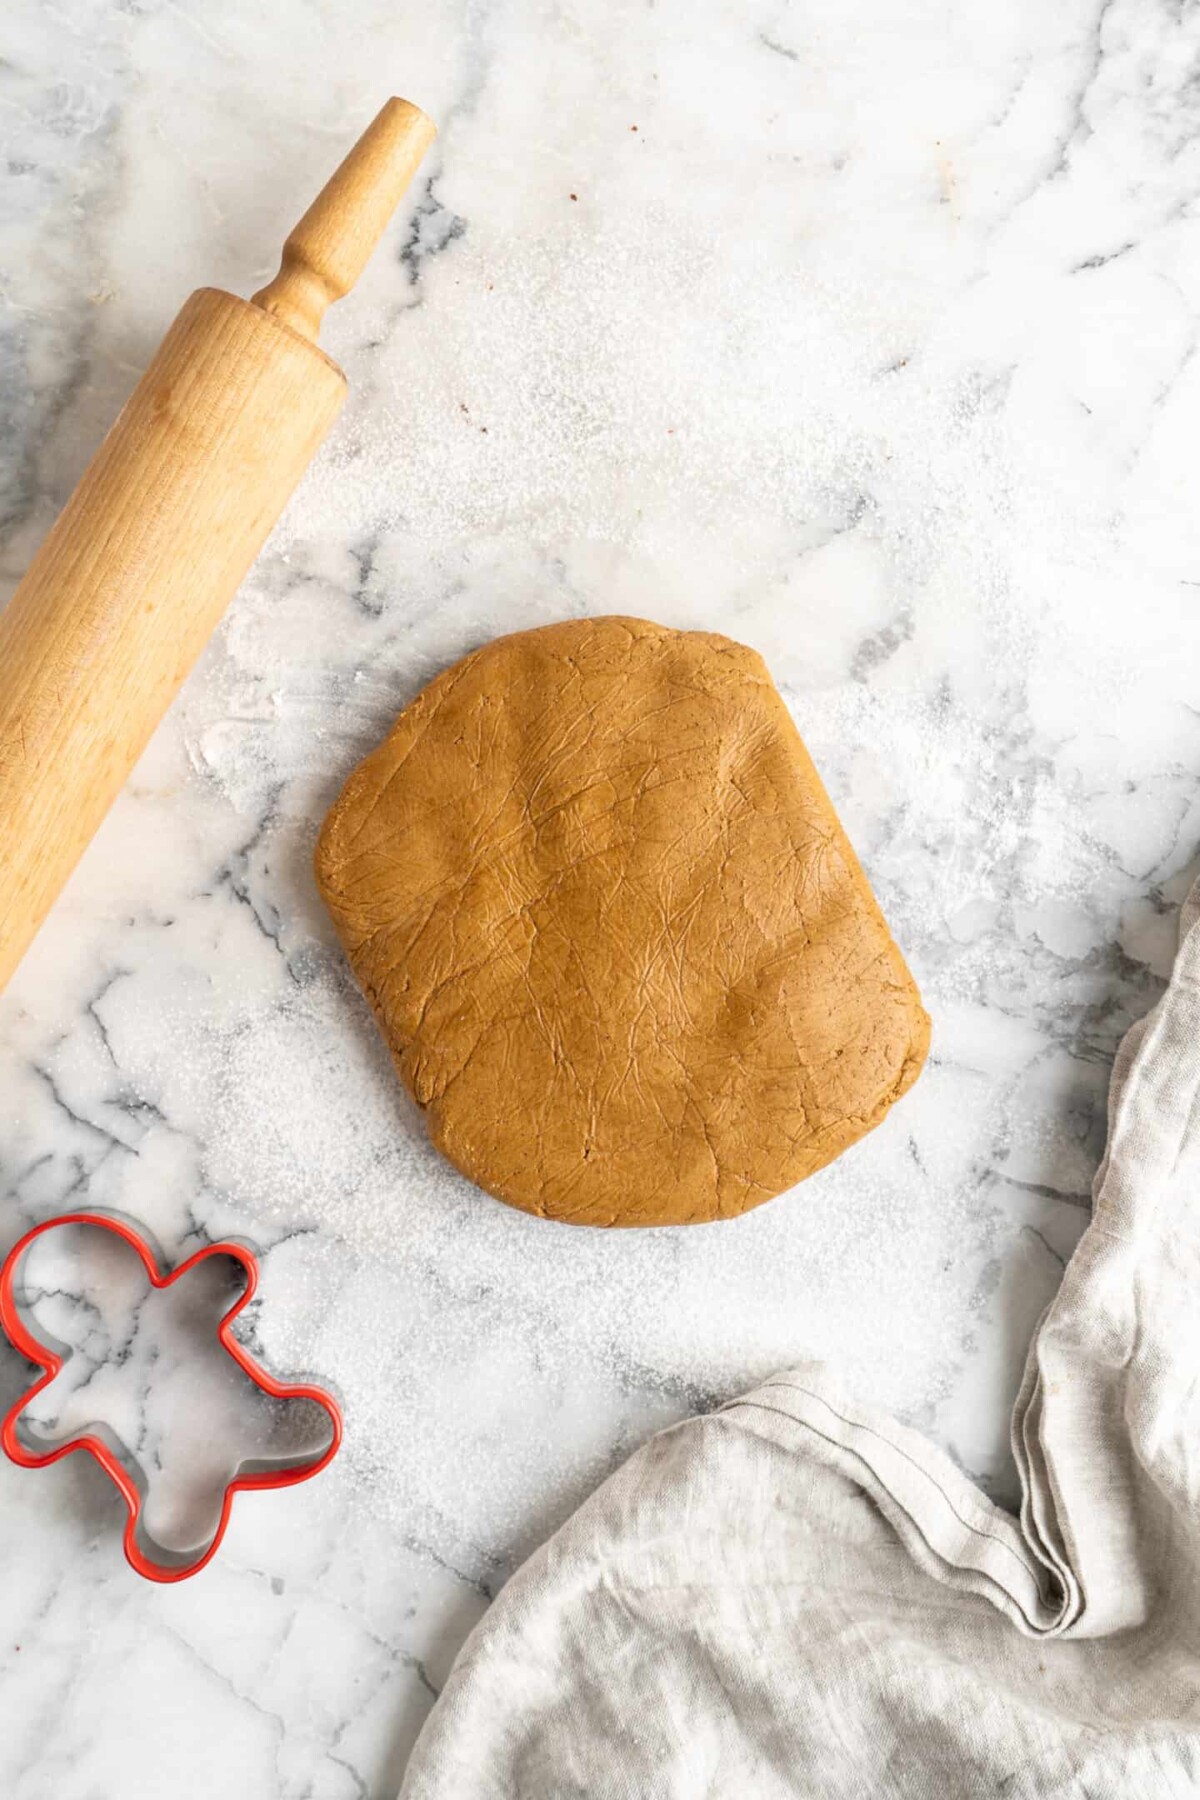 A think disk of gingerbread men dough on a marble counter, next to a kitchen towel, a gingerbread men cookie cutter, and a rolling pin